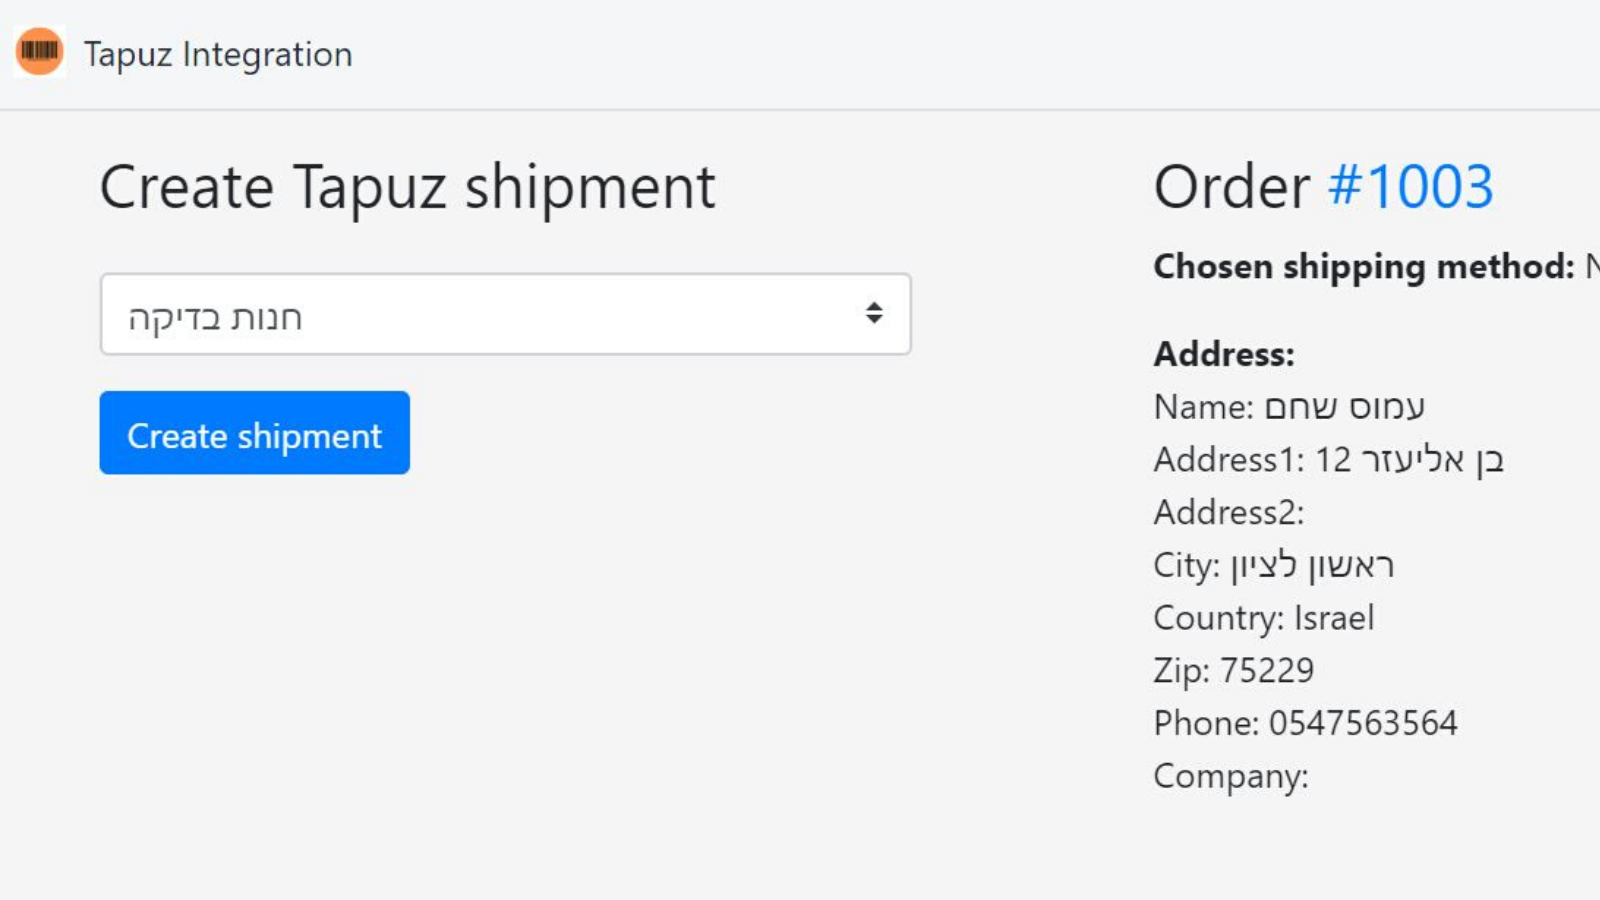 Send a new shipment to Tapuz systems